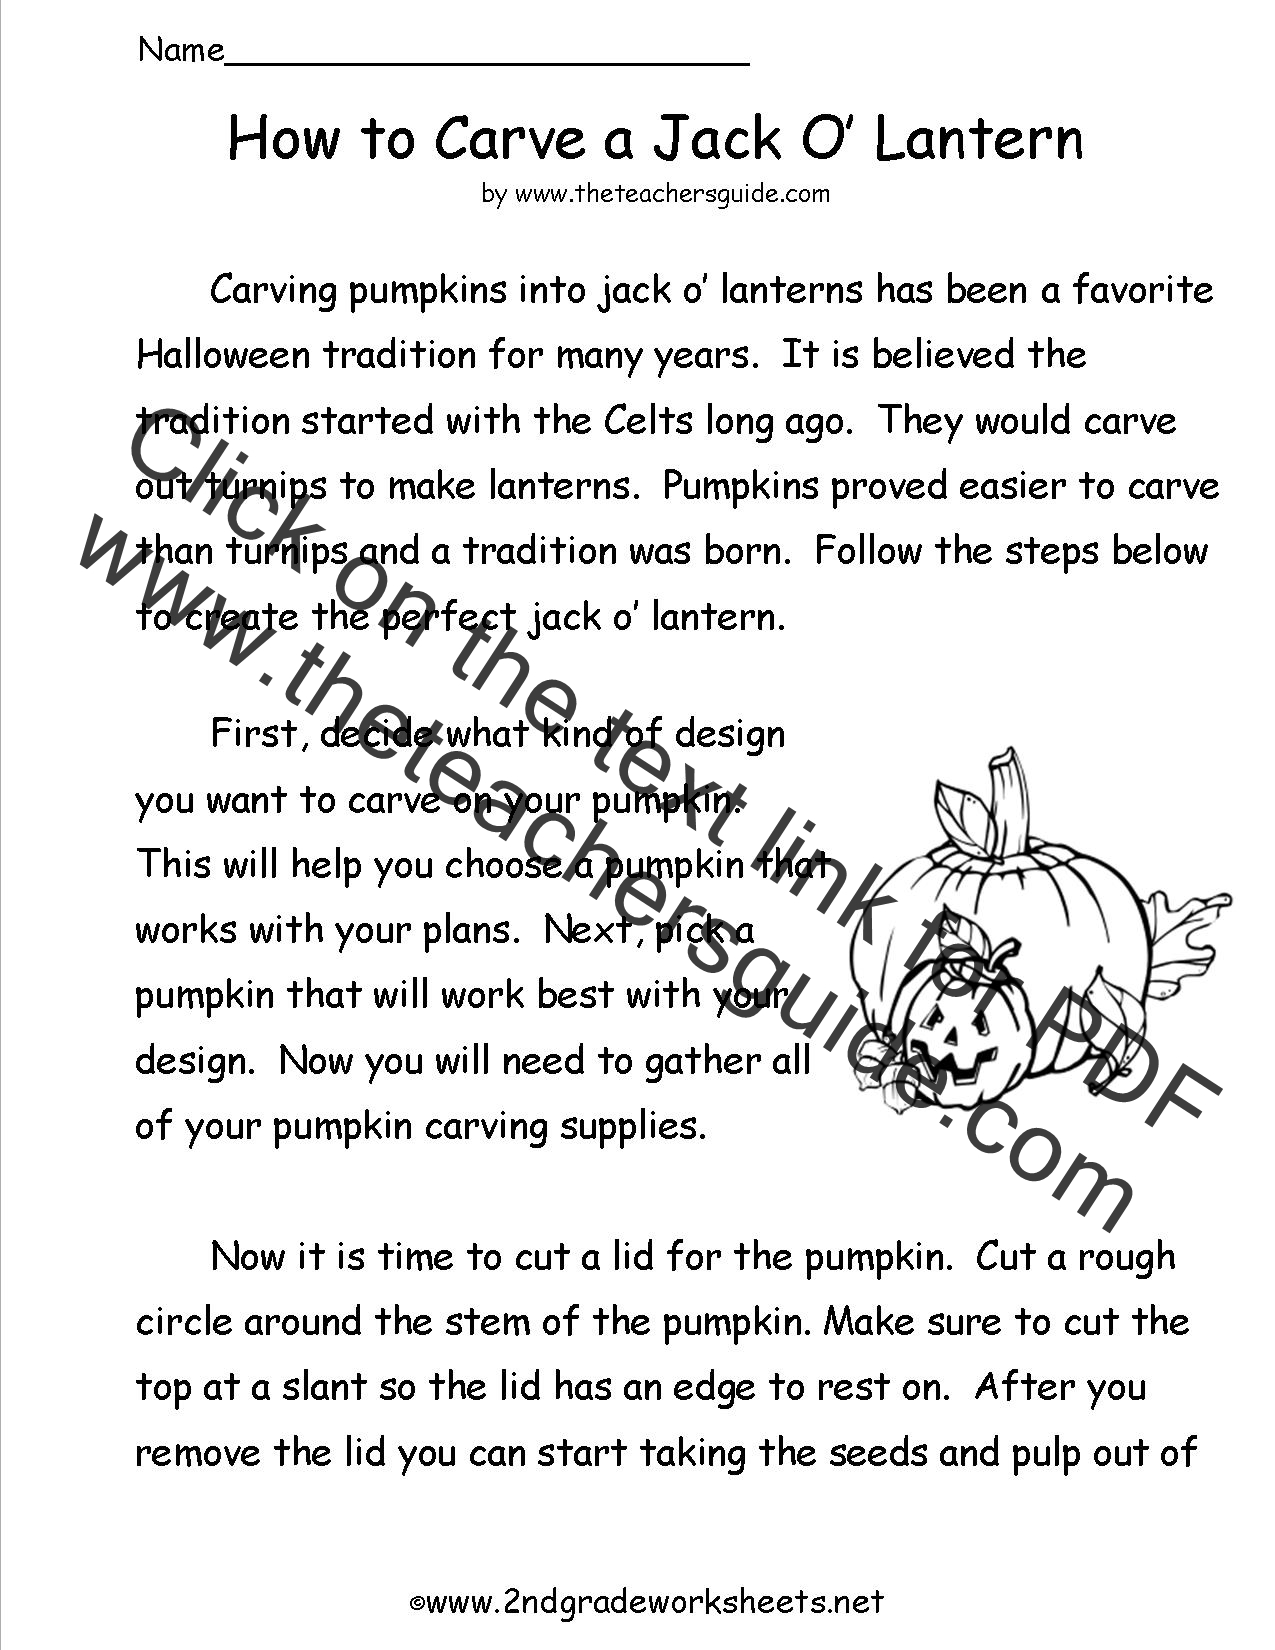 Reading Informational Text Worksheets Intended For Text Features Worksheet 2nd Grade